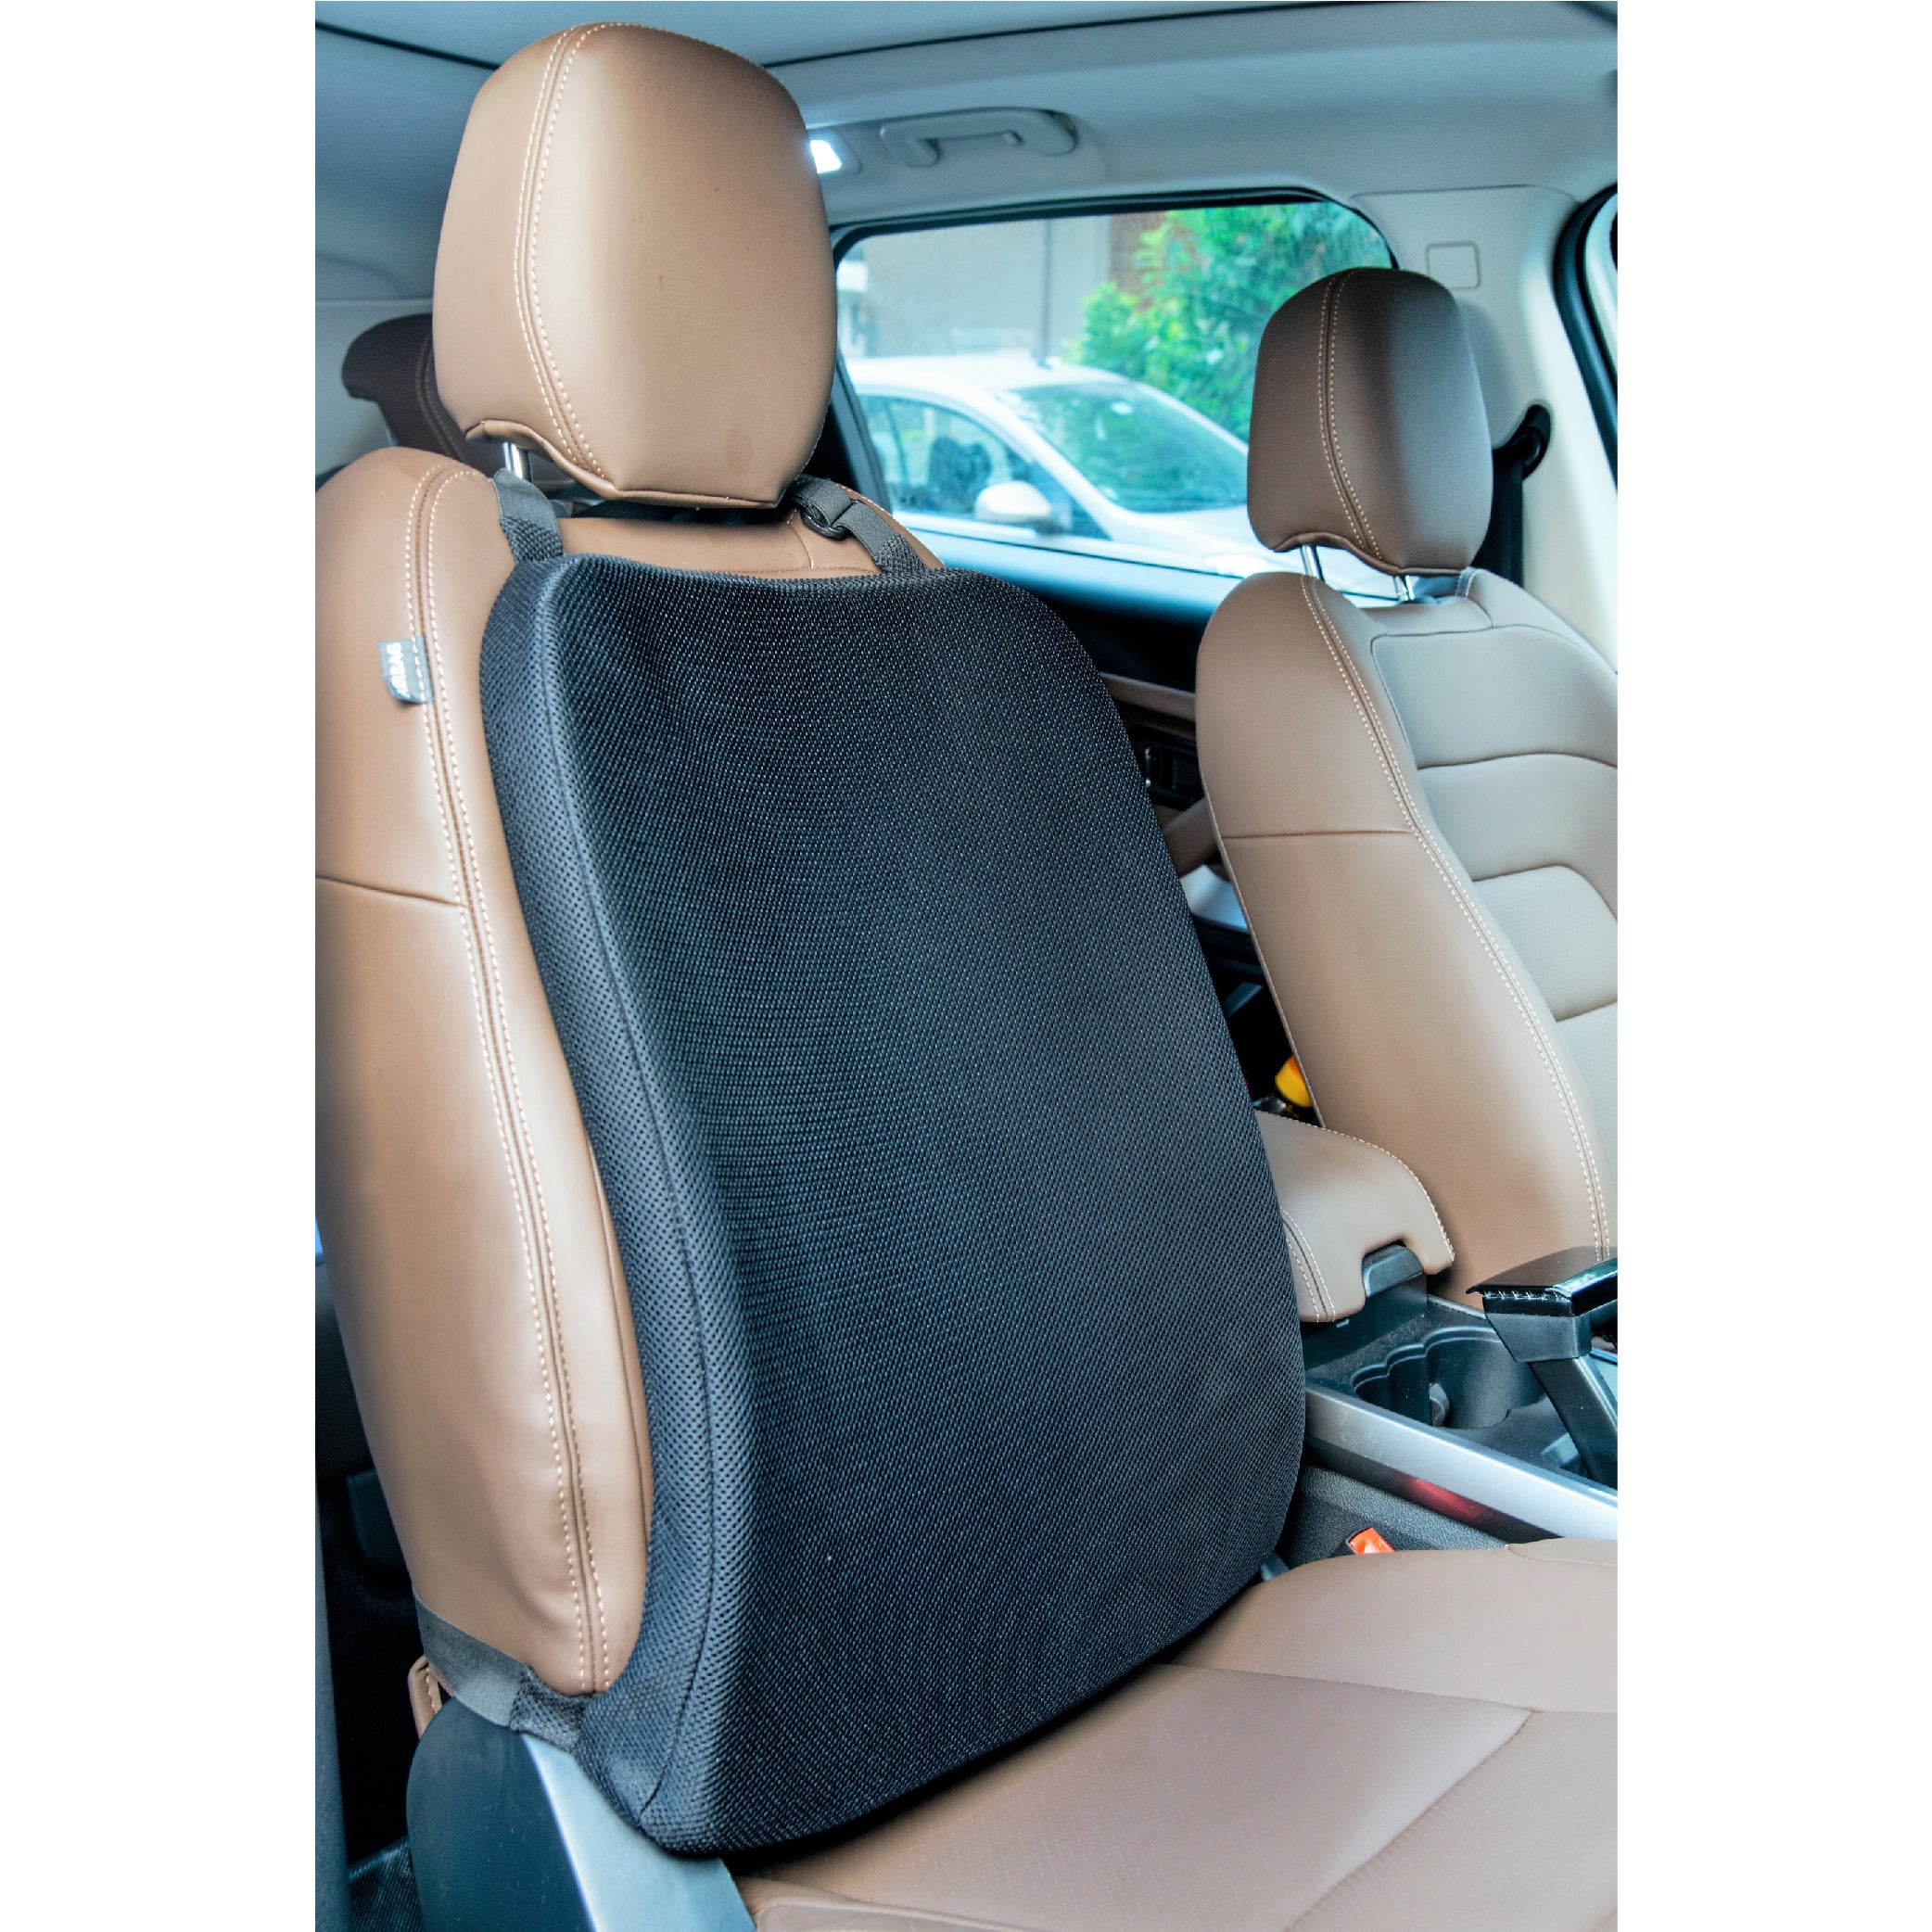 Buy Car Comfort Layer Seat-Back Memory Foam Cushion - Upgrades The